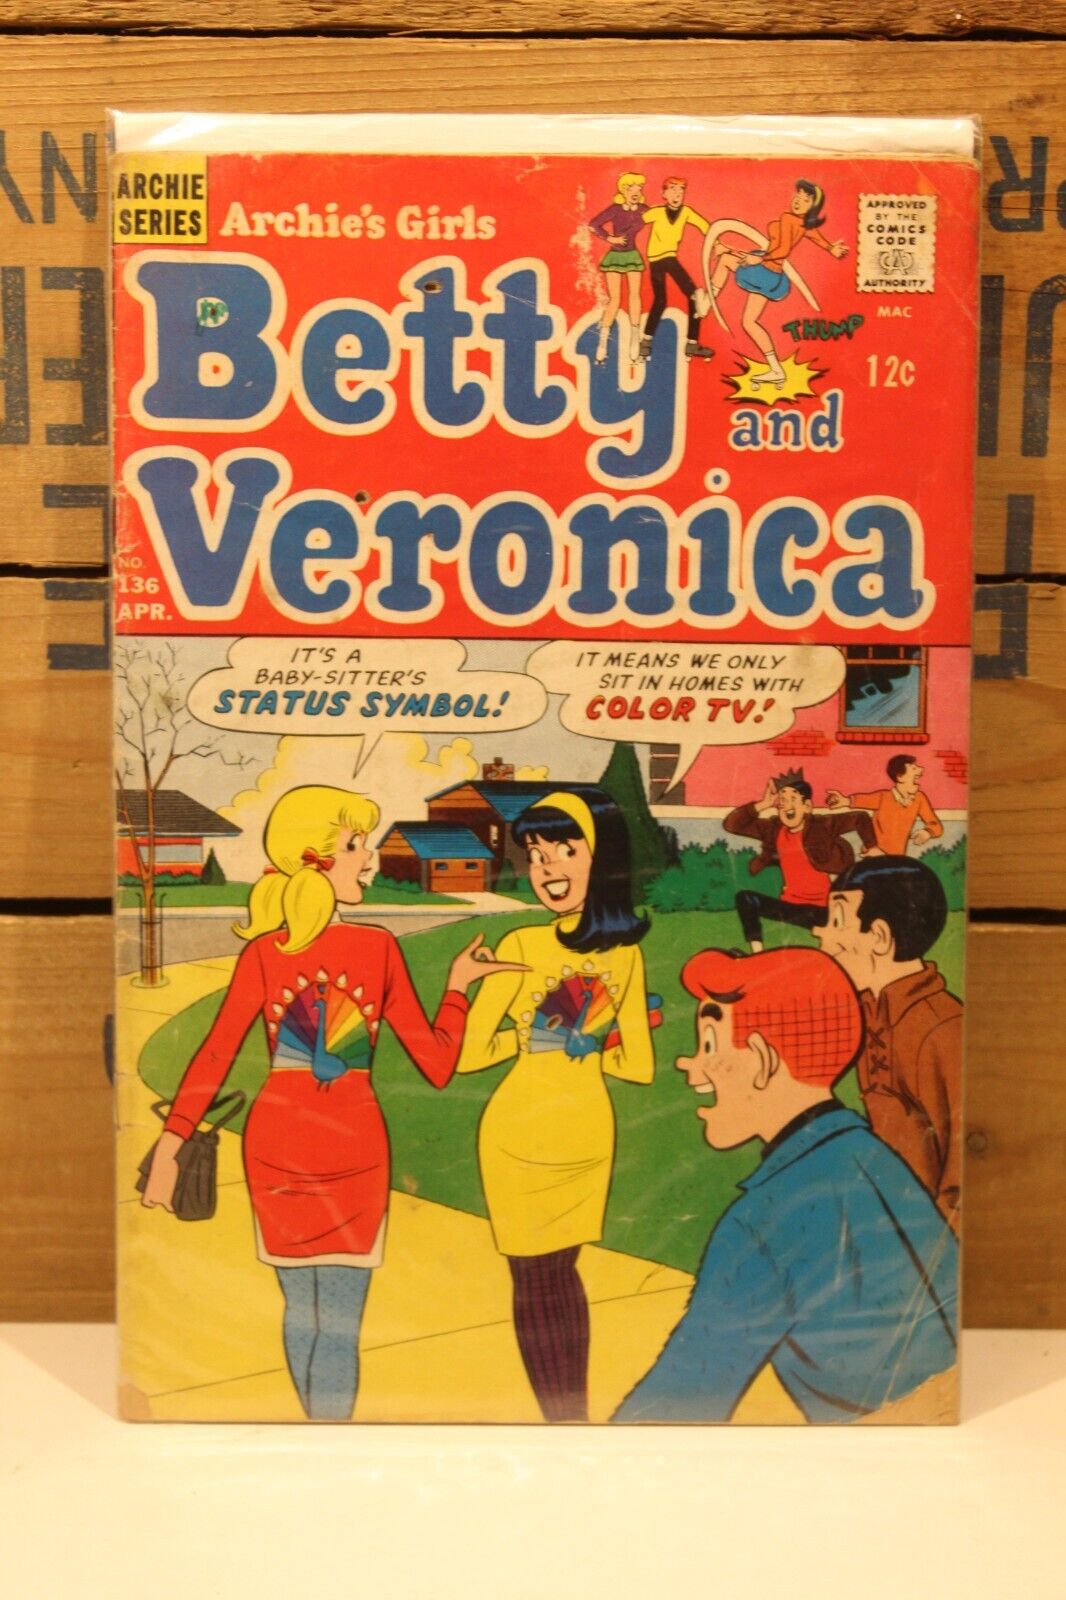 Archie Series BETTY AND VERONICA #136 Fair/good 12 cent